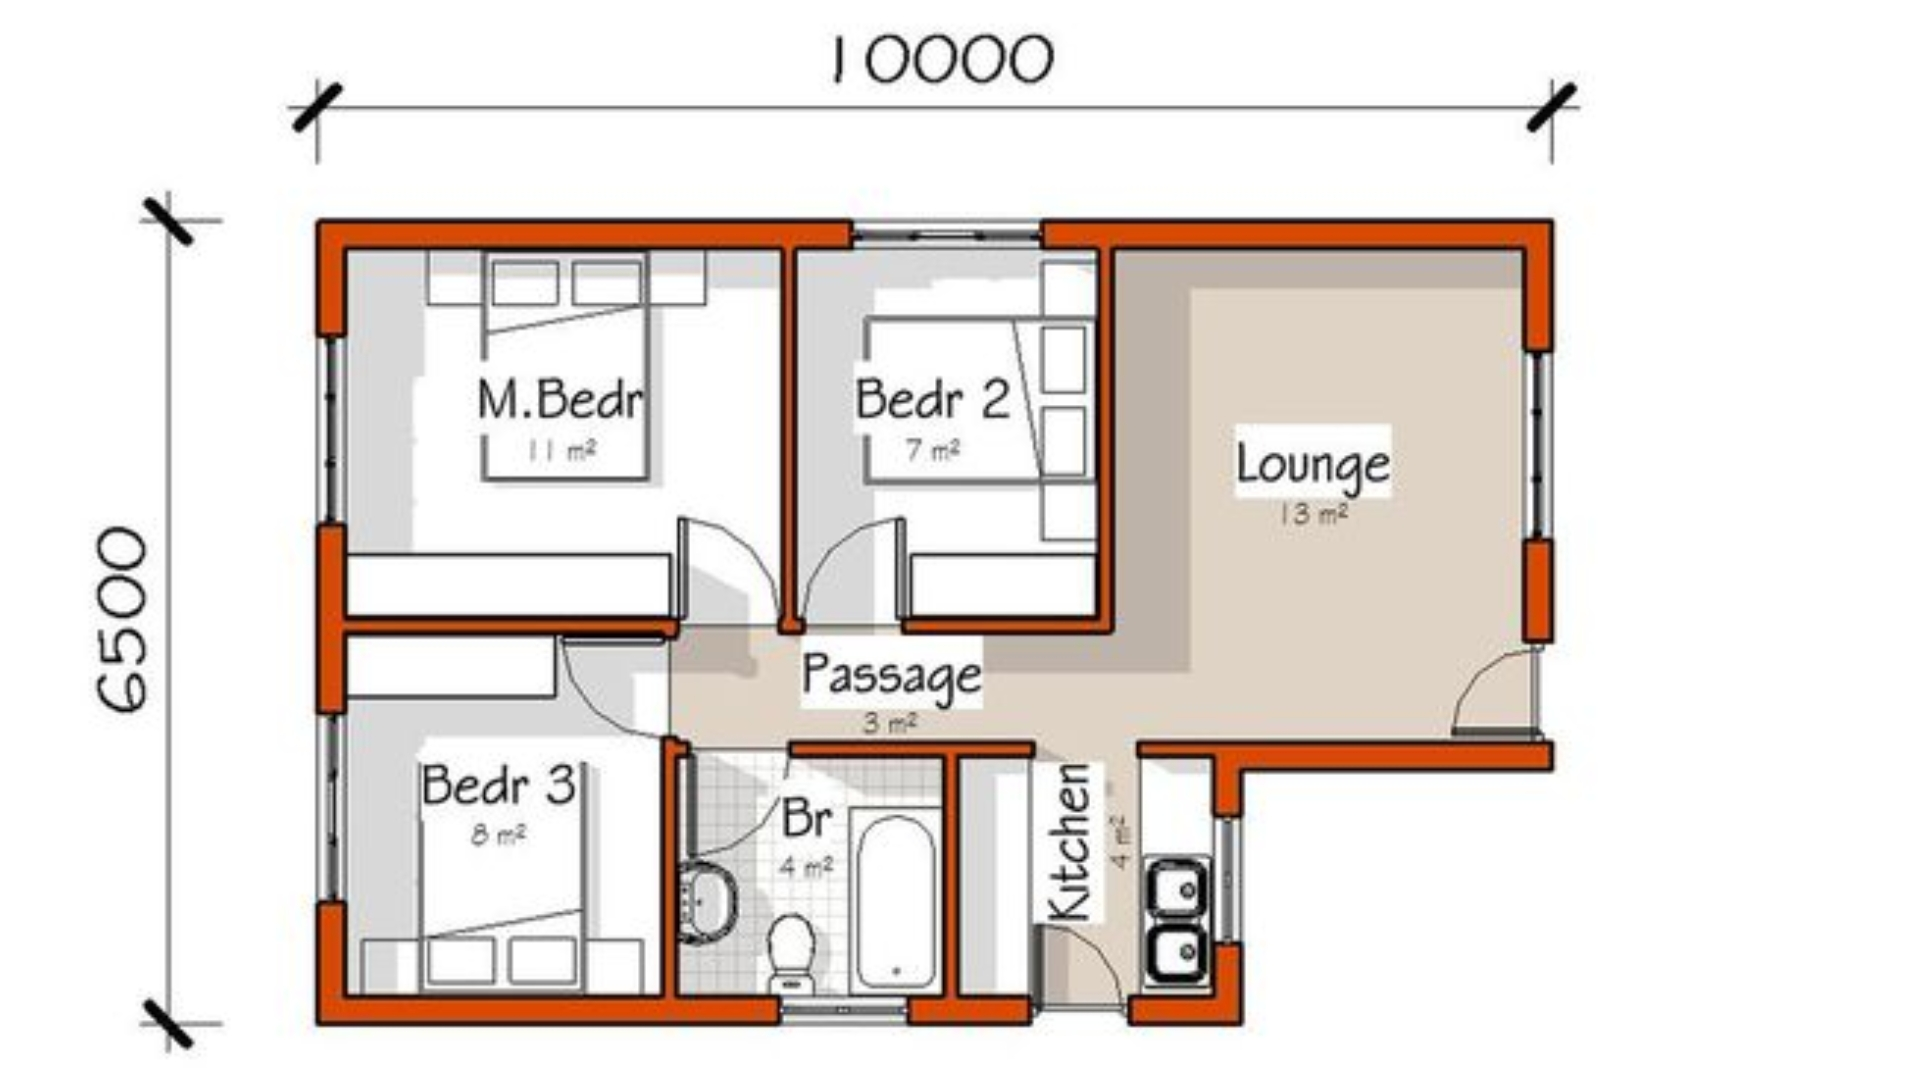 3 bedroom nutec houses plans image 